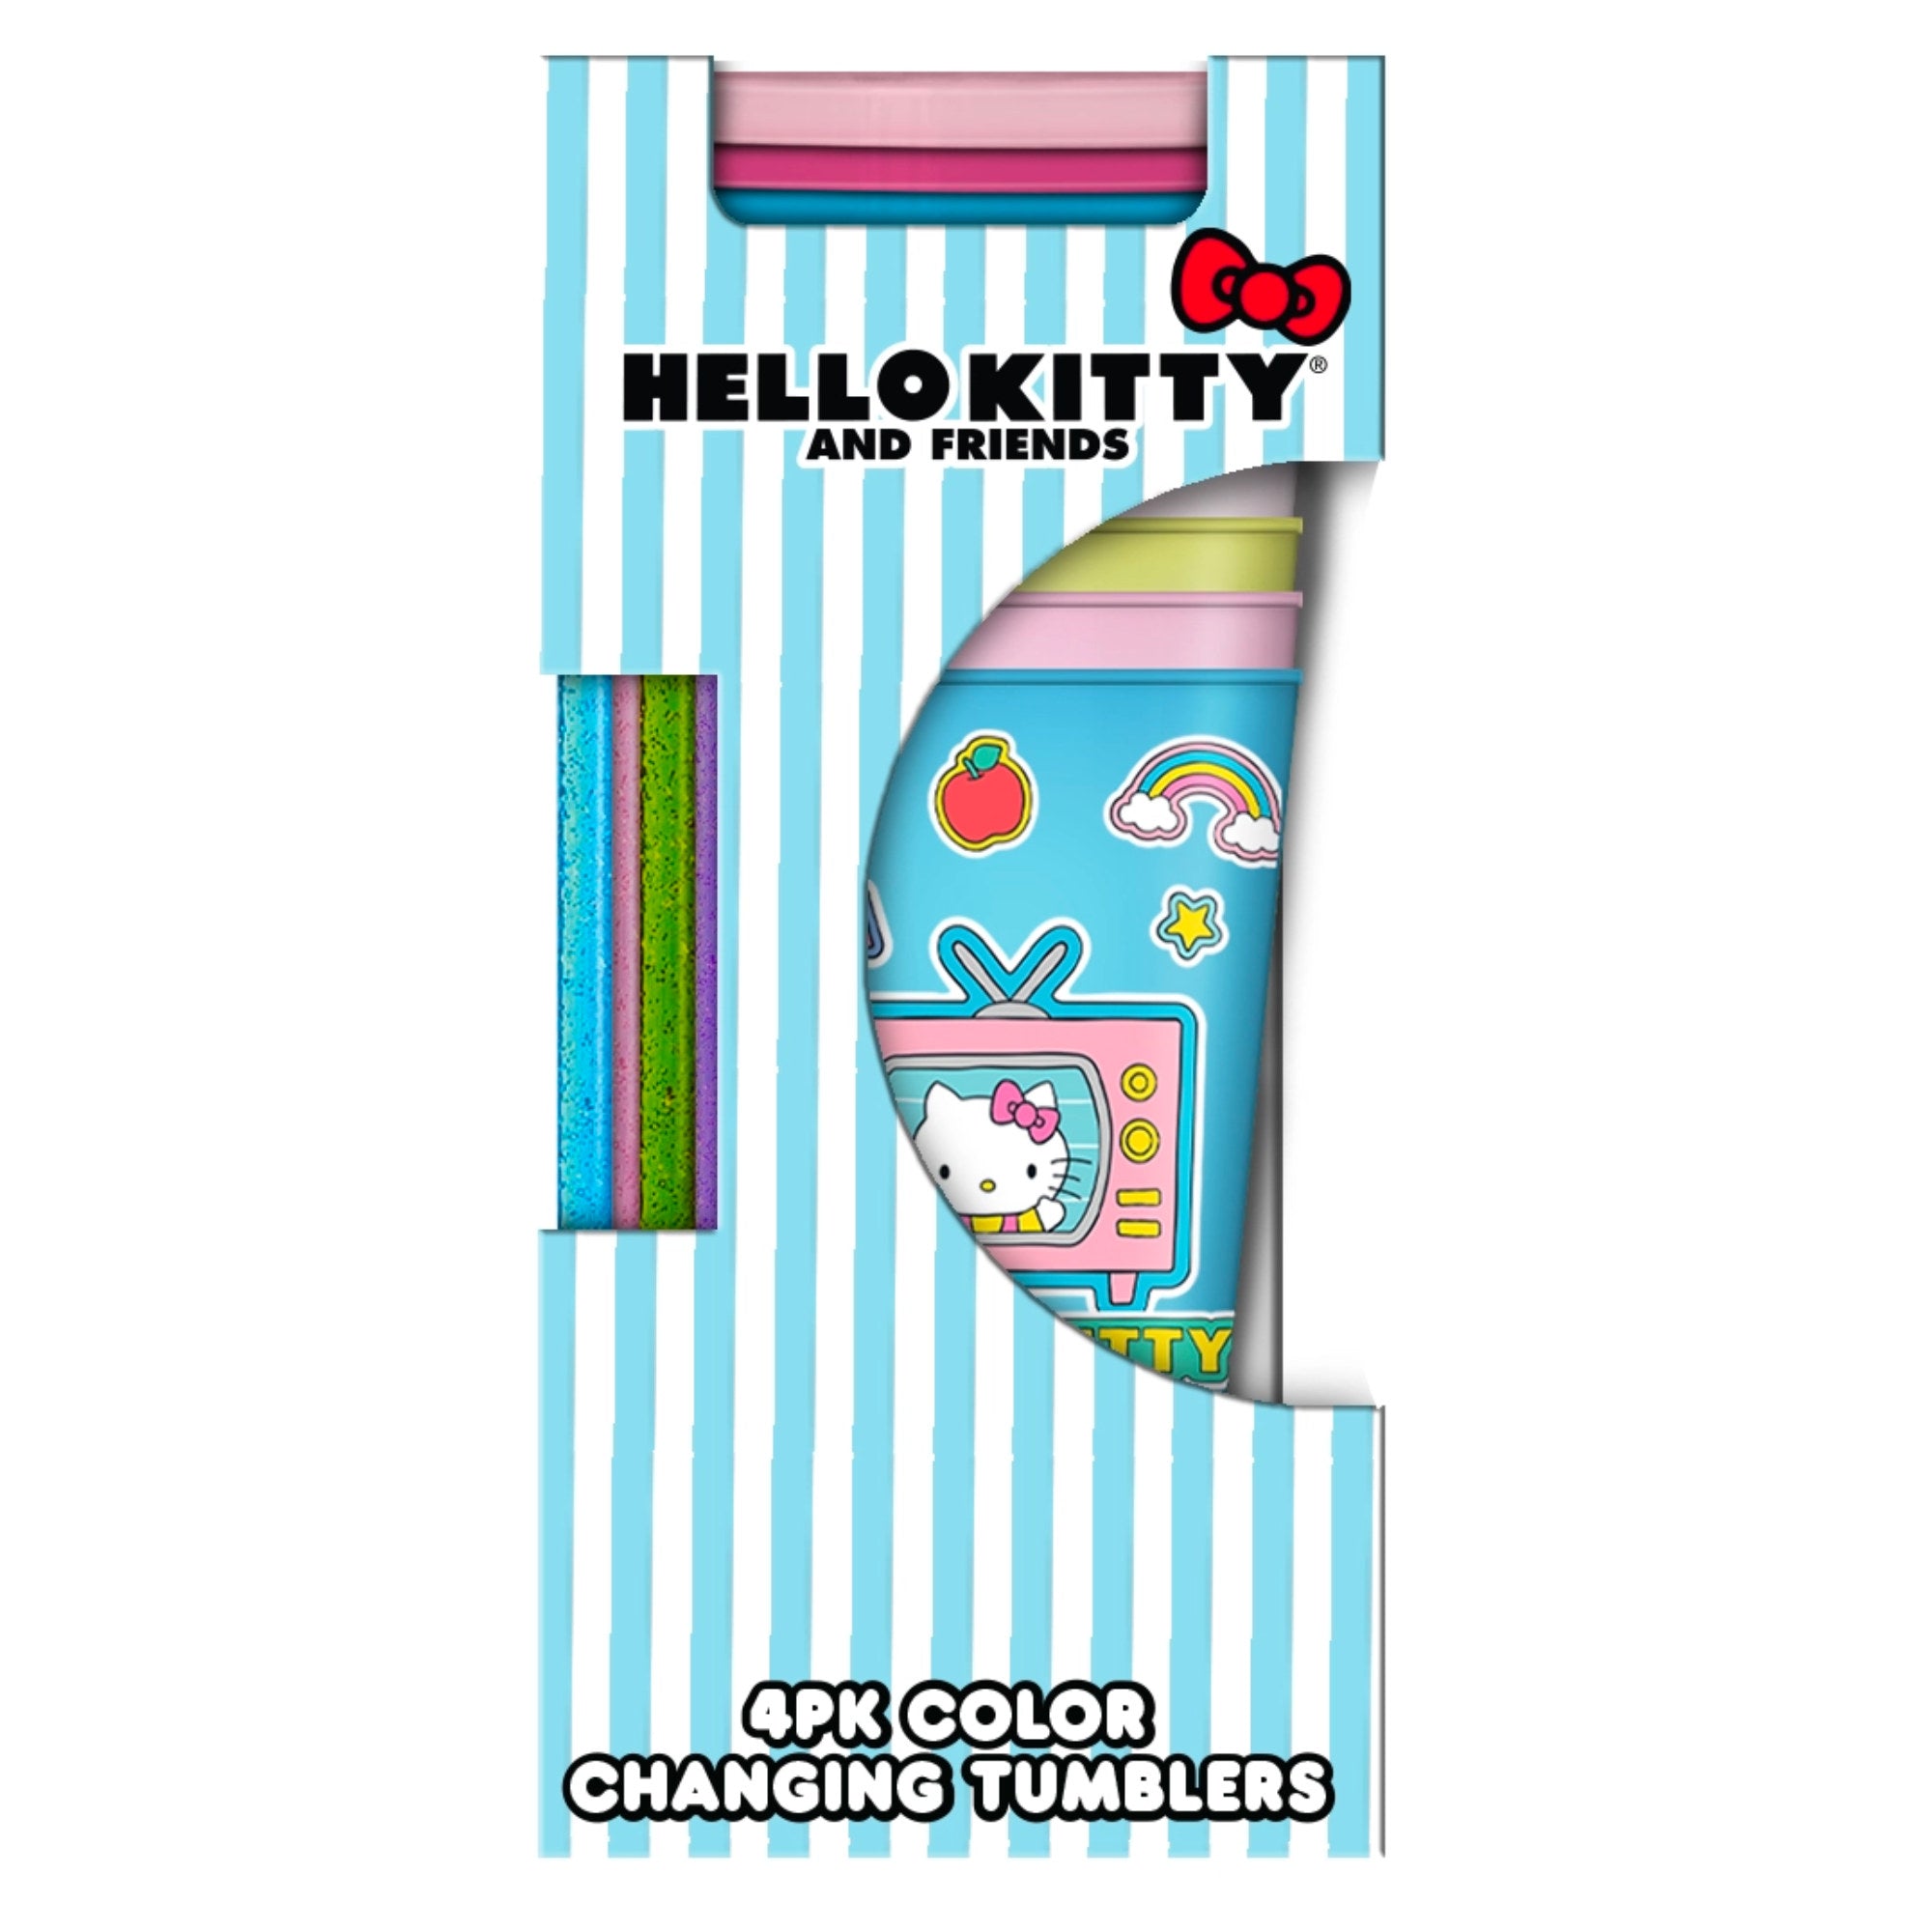 Hello Kitty 32 Ounce Rainbow Tumbler With Lid and Straw 